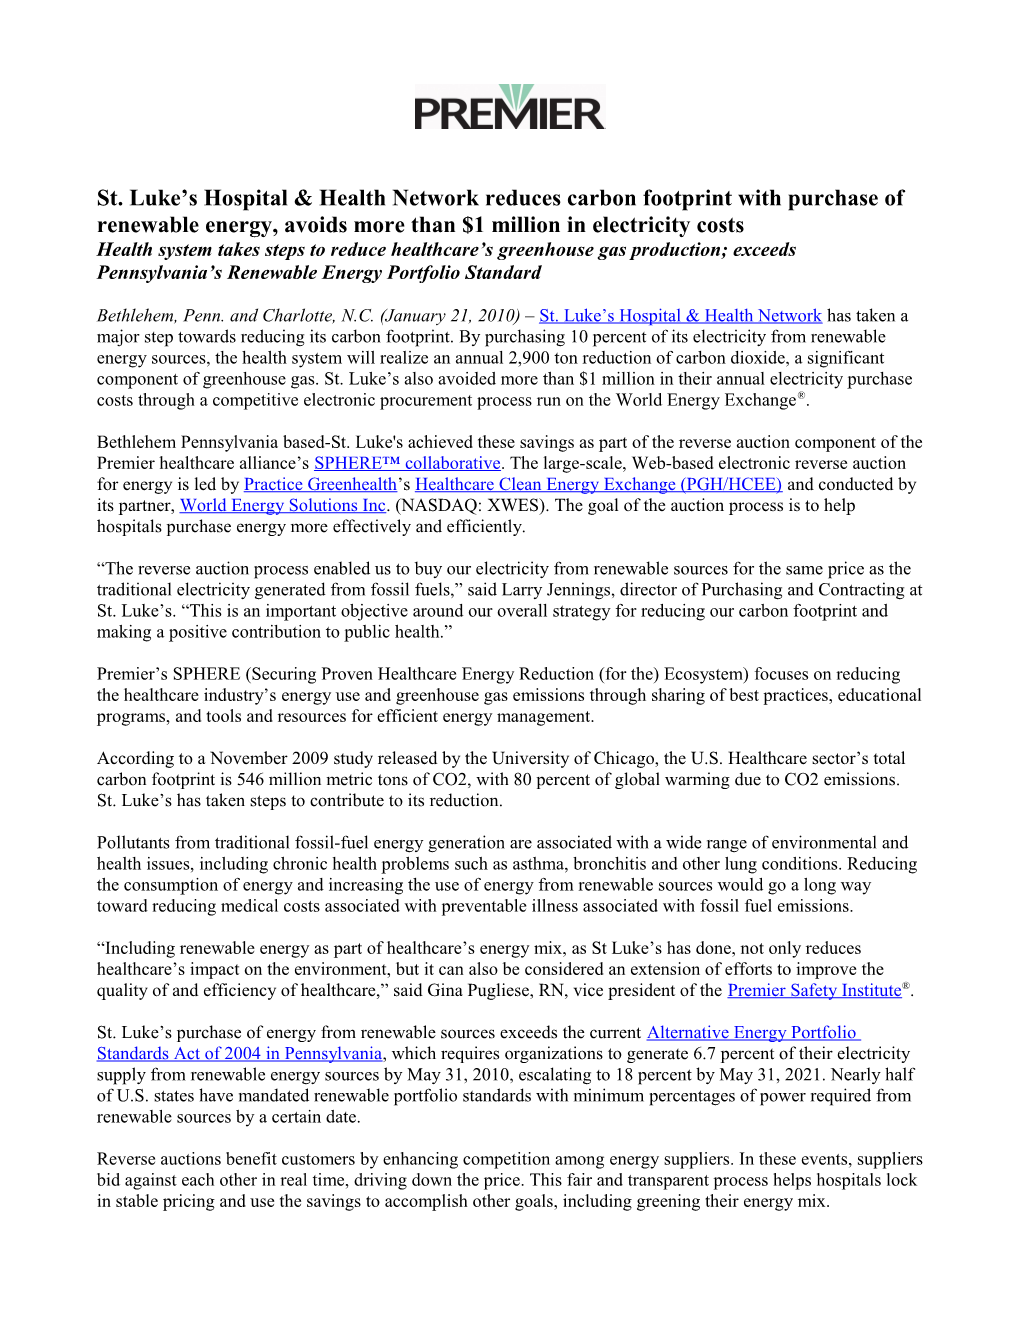 St. Luke S Hospital & Health Network Reduces Carbon Footprint with Purchase of Renewable